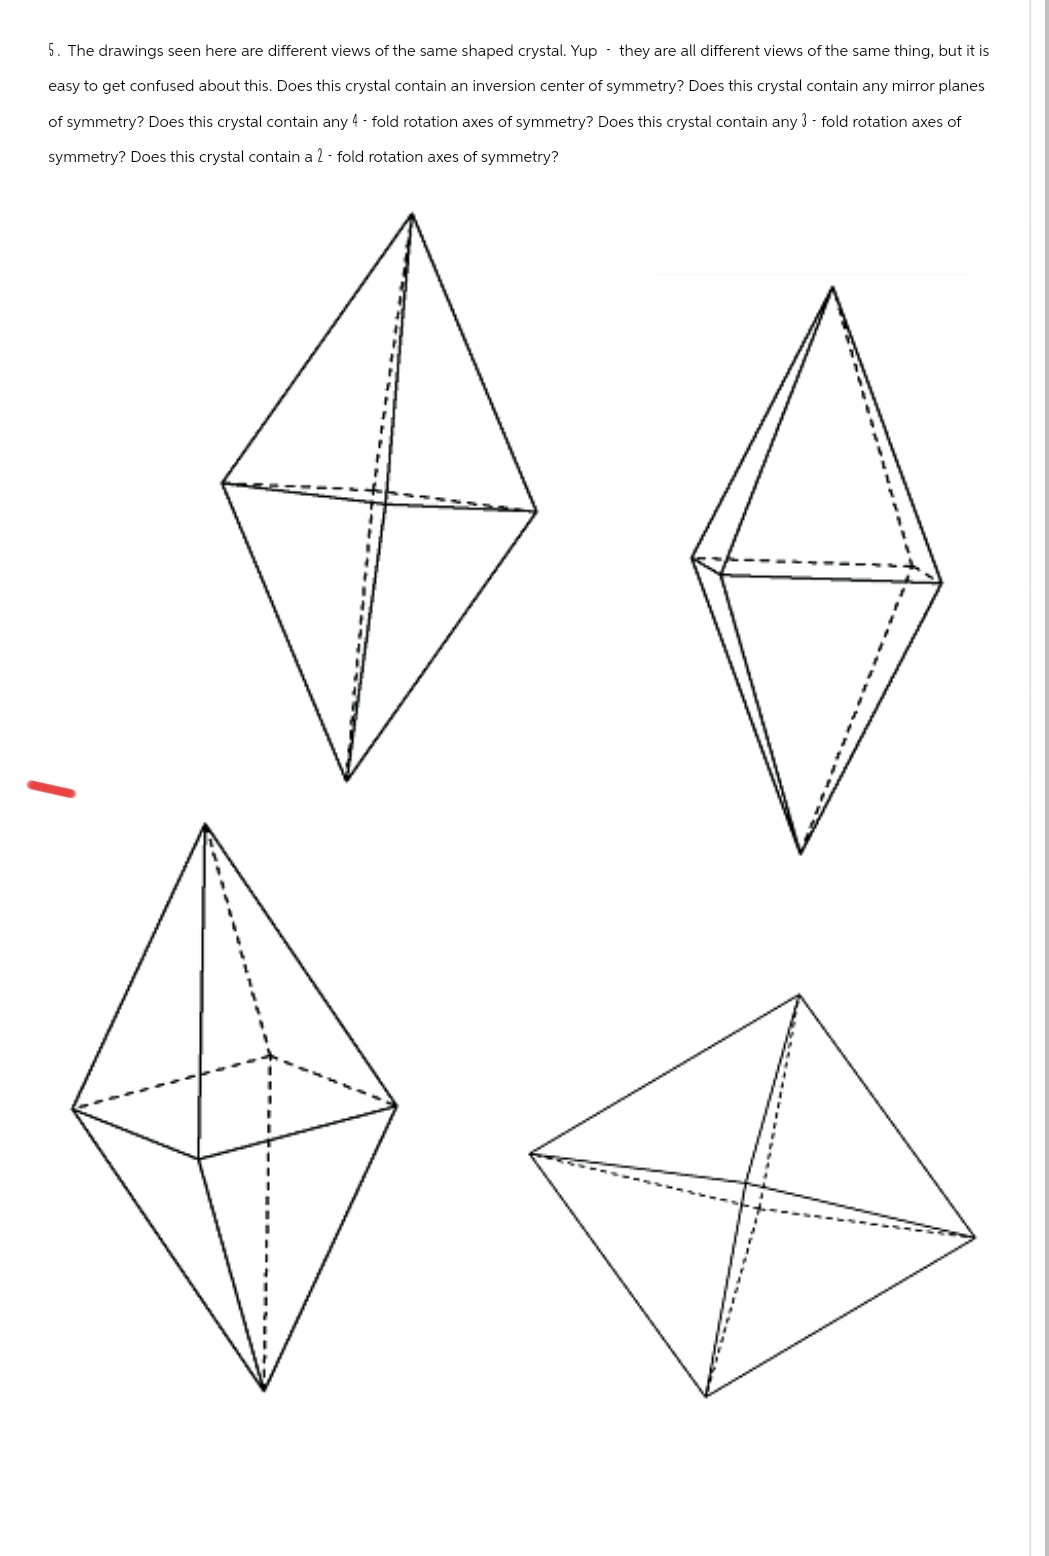 5. The drawings seen here are different views of the same shaped crystal. Yup they are all different views of the same thing, but it is
easy to get confused about this. Does this crystal contain an inversion center of symmetry? Does this crystal contain any mirror planes
of symmetry? Does this crystal contain any 4-fold rotation axes of symmetry? Does this crystal contain any 3-fold rotation axes of
symmetry? Does this crystal contain a 2-fold rotation axes of symmetry?